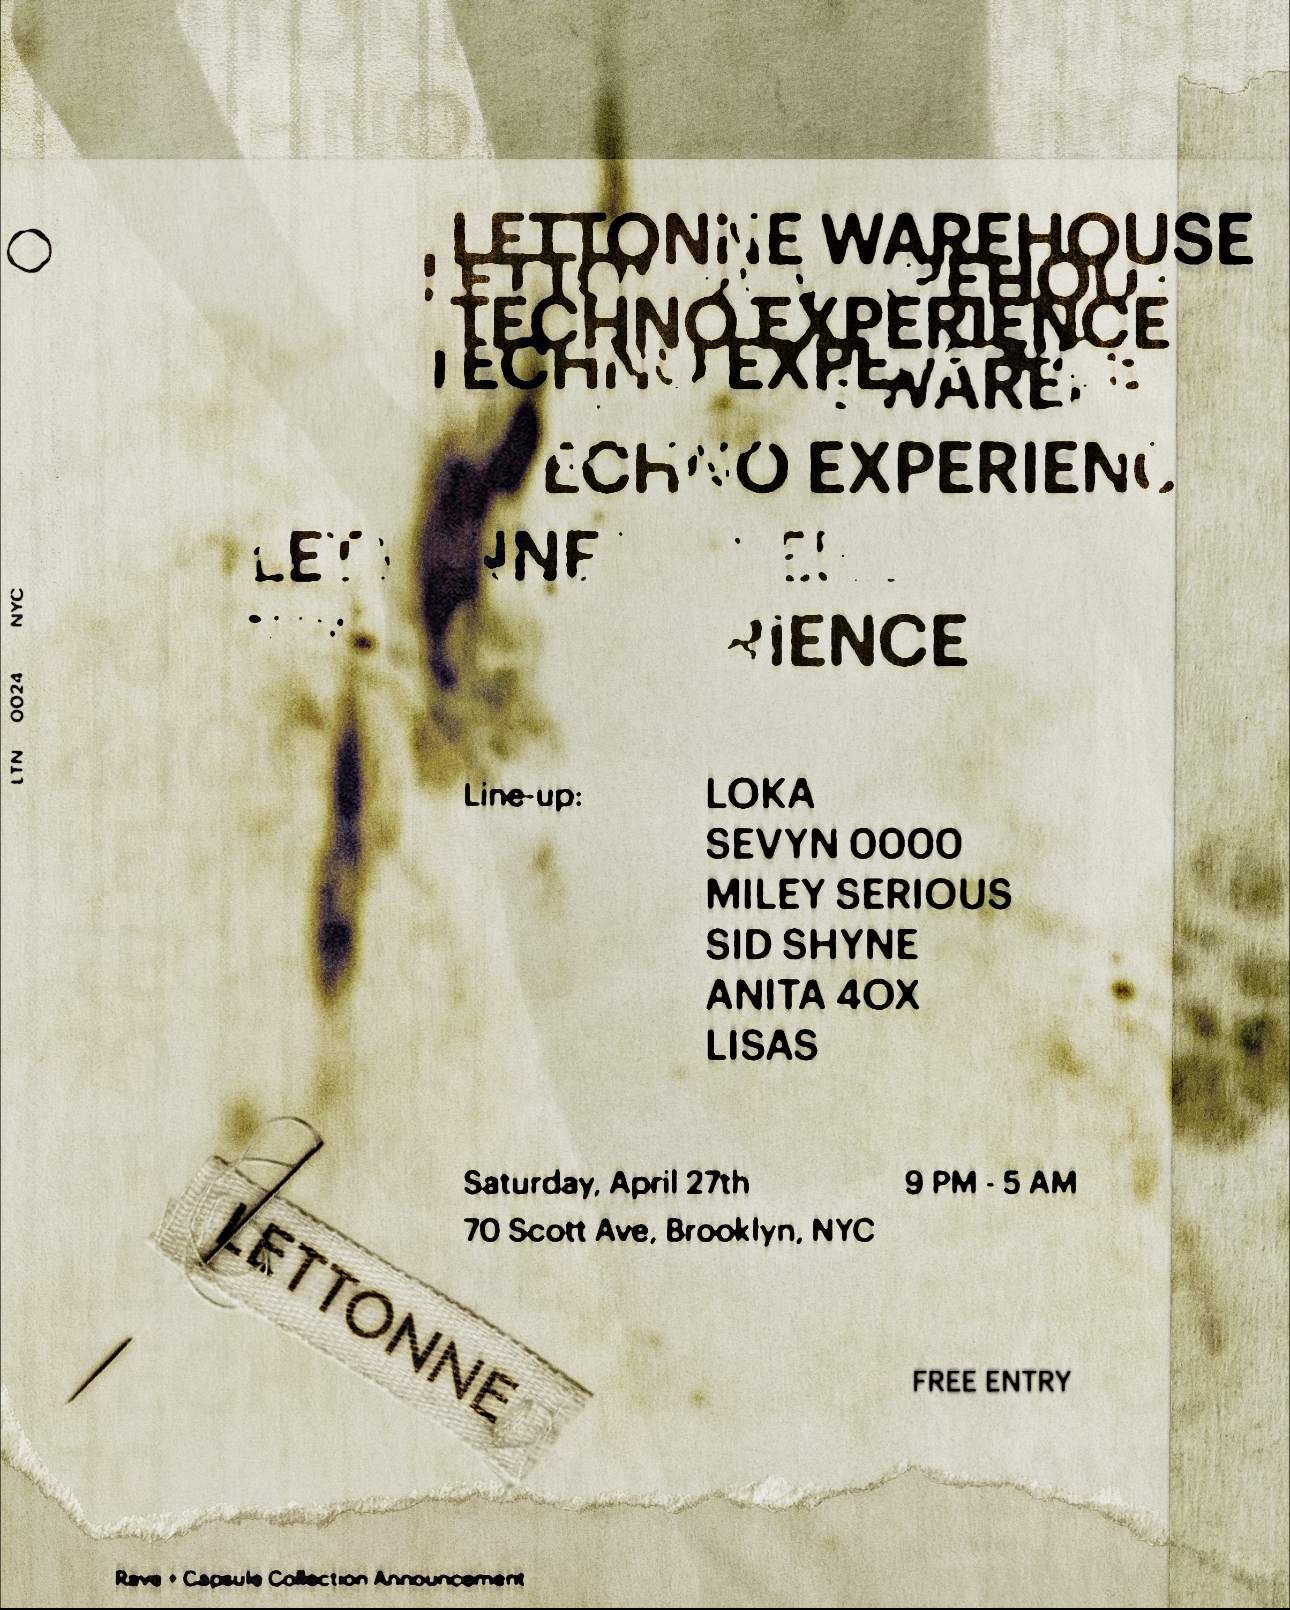 LETTONNE WAREHOUSE: TECHNO EXPERIENCE (ACT 2) - フライヤー表